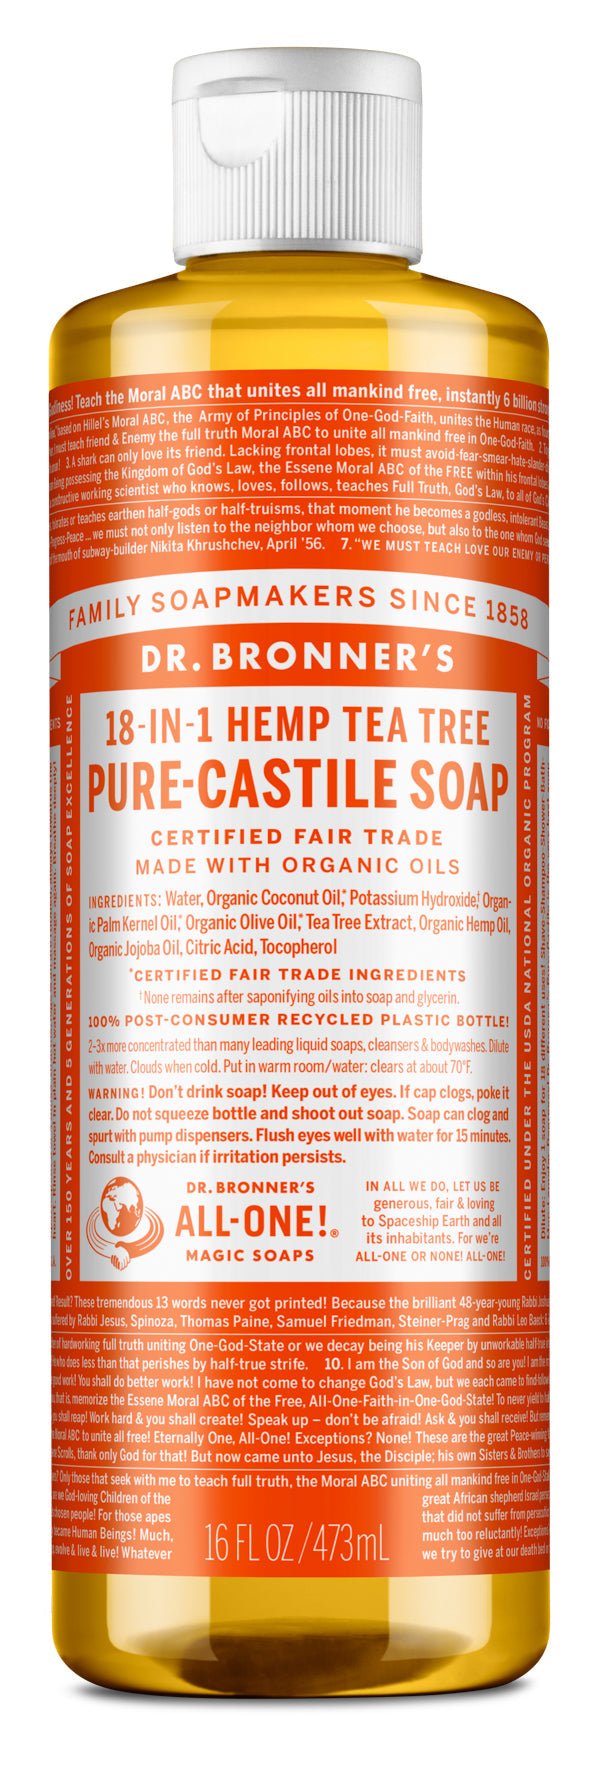 Dr. Bronner's 18-IN-1 TeaTree Pure-Castille Soap - Nutrition Plus